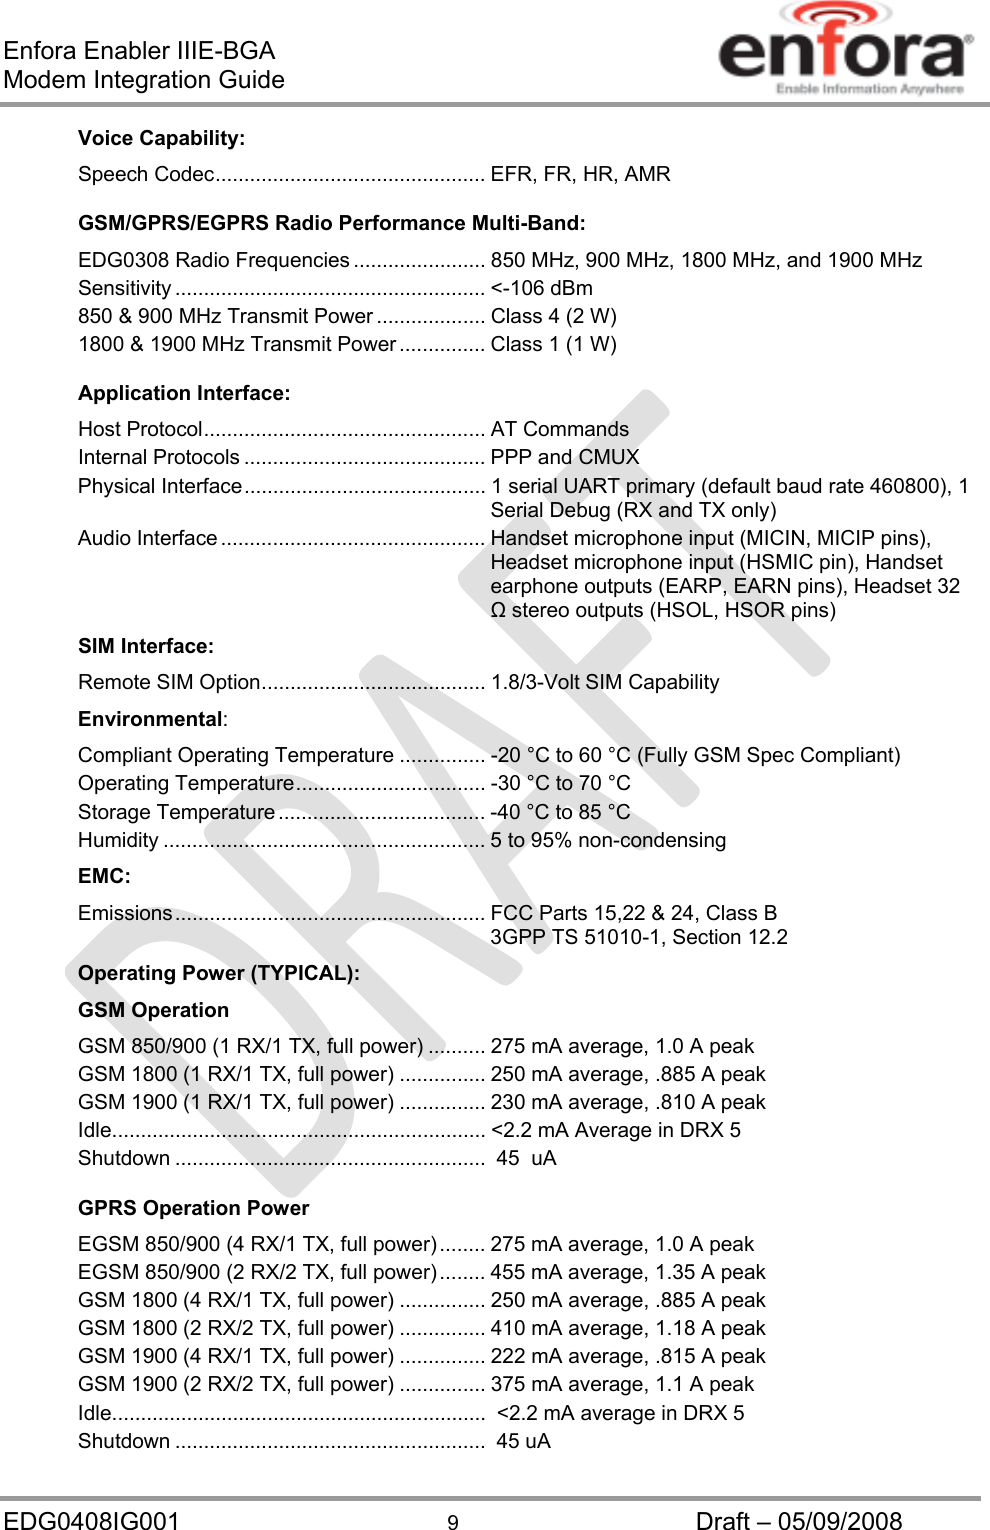 Enfora Enabler IIIE-BGA Modem Integration Guide EDG0408IG001  9  Draft – 05/09/2008 Voice Capability: Speech Codec ............................................... EFR, FR, HR, AMR GSM/GPRS/EGPRS Radio Performance Multi-Band: EDG0308 Radio Frequencies ....................... 850 MHz, 900 MHz, 1800 MHz, and 1900 MHz  Sensitivity ...................................................... &lt;-106  dBm 850 &amp; 900 MHz Transmit Power ................... Class 4 (2 W) 1800 &amp; 1900 MHz Transmit Power ............... Class 1 (1 W)  Application Interface: Host Protocol ................................................. AT Commands Internal Protocols .......................................... PPP and CMUX Physical Interface ..........................................  1  serial  UART primary (default baud rate 460800), 1 Serial Debug (RX and TX only) Audio Interface .............................................. Handset microphone input (MICIN, MICIP pins), Headset microphone input (HSMIC pin), Handset earphone outputs (EARP, EARN pins), Headset 32  stereo outputs (HSOL, HSOR pins) SIM Interface: Remote SIM Option ....................................... 1.8/3-Volt SIM Capability Environmental: Compliant Operating Temperature ............... -20 °C to 60 °C (Fully GSM Spec Compliant) Operating Temperature ................................. -30 °C to 70 °C Storage Temperature .................................... -40 °C to 85 °C Humidity ........................................................ 5 to 95% non-condensing EMC: Emissions ......................................................  FCC Parts 15,22 &amp; 24, Class B 3GPP TS 51010-1, Section 12.2 Operating Power (TYPICAL): GSM Operation GSM 850/900 (1 RX/1 TX, full power) .......... 275 mA average, 1.0 A peak GSM 1800 (1 RX/1 TX, full power) ............... 250 mA average, .885 A peak GSM 1900 (1 RX/1 TX, full power) ............... 230 mA average, .810 A peak Idle ................................................................. &lt;2.2 mA Average in DRX 5 Shutdown ......................................................  45  uA GPRS Operation Power EGSM 850/900 (4 RX/1 TX, full power) ........ 275 mA average, 1.0 A peak EGSM 850/900 (2 RX/2 TX, full power) ........ 455 mA average, 1.35 A peak GSM 1800 (4 RX/1 TX, full power) ............... 250 mA average, .885 A peak GSM 1800 (2 RX/2 TX, full power) ............... 410 mA average, 1.18 A peak GSM 1900 (4 RX/1 TX, full power) ............... 222 mA average, .815 A peak GSM 1900 (2 RX/2 TX, full power) ............... 375 mA average, 1.1 A peak Idle .................................................................  &lt;2.2 mA average in DRX 5 Shutdown ......................................................  45 uA 